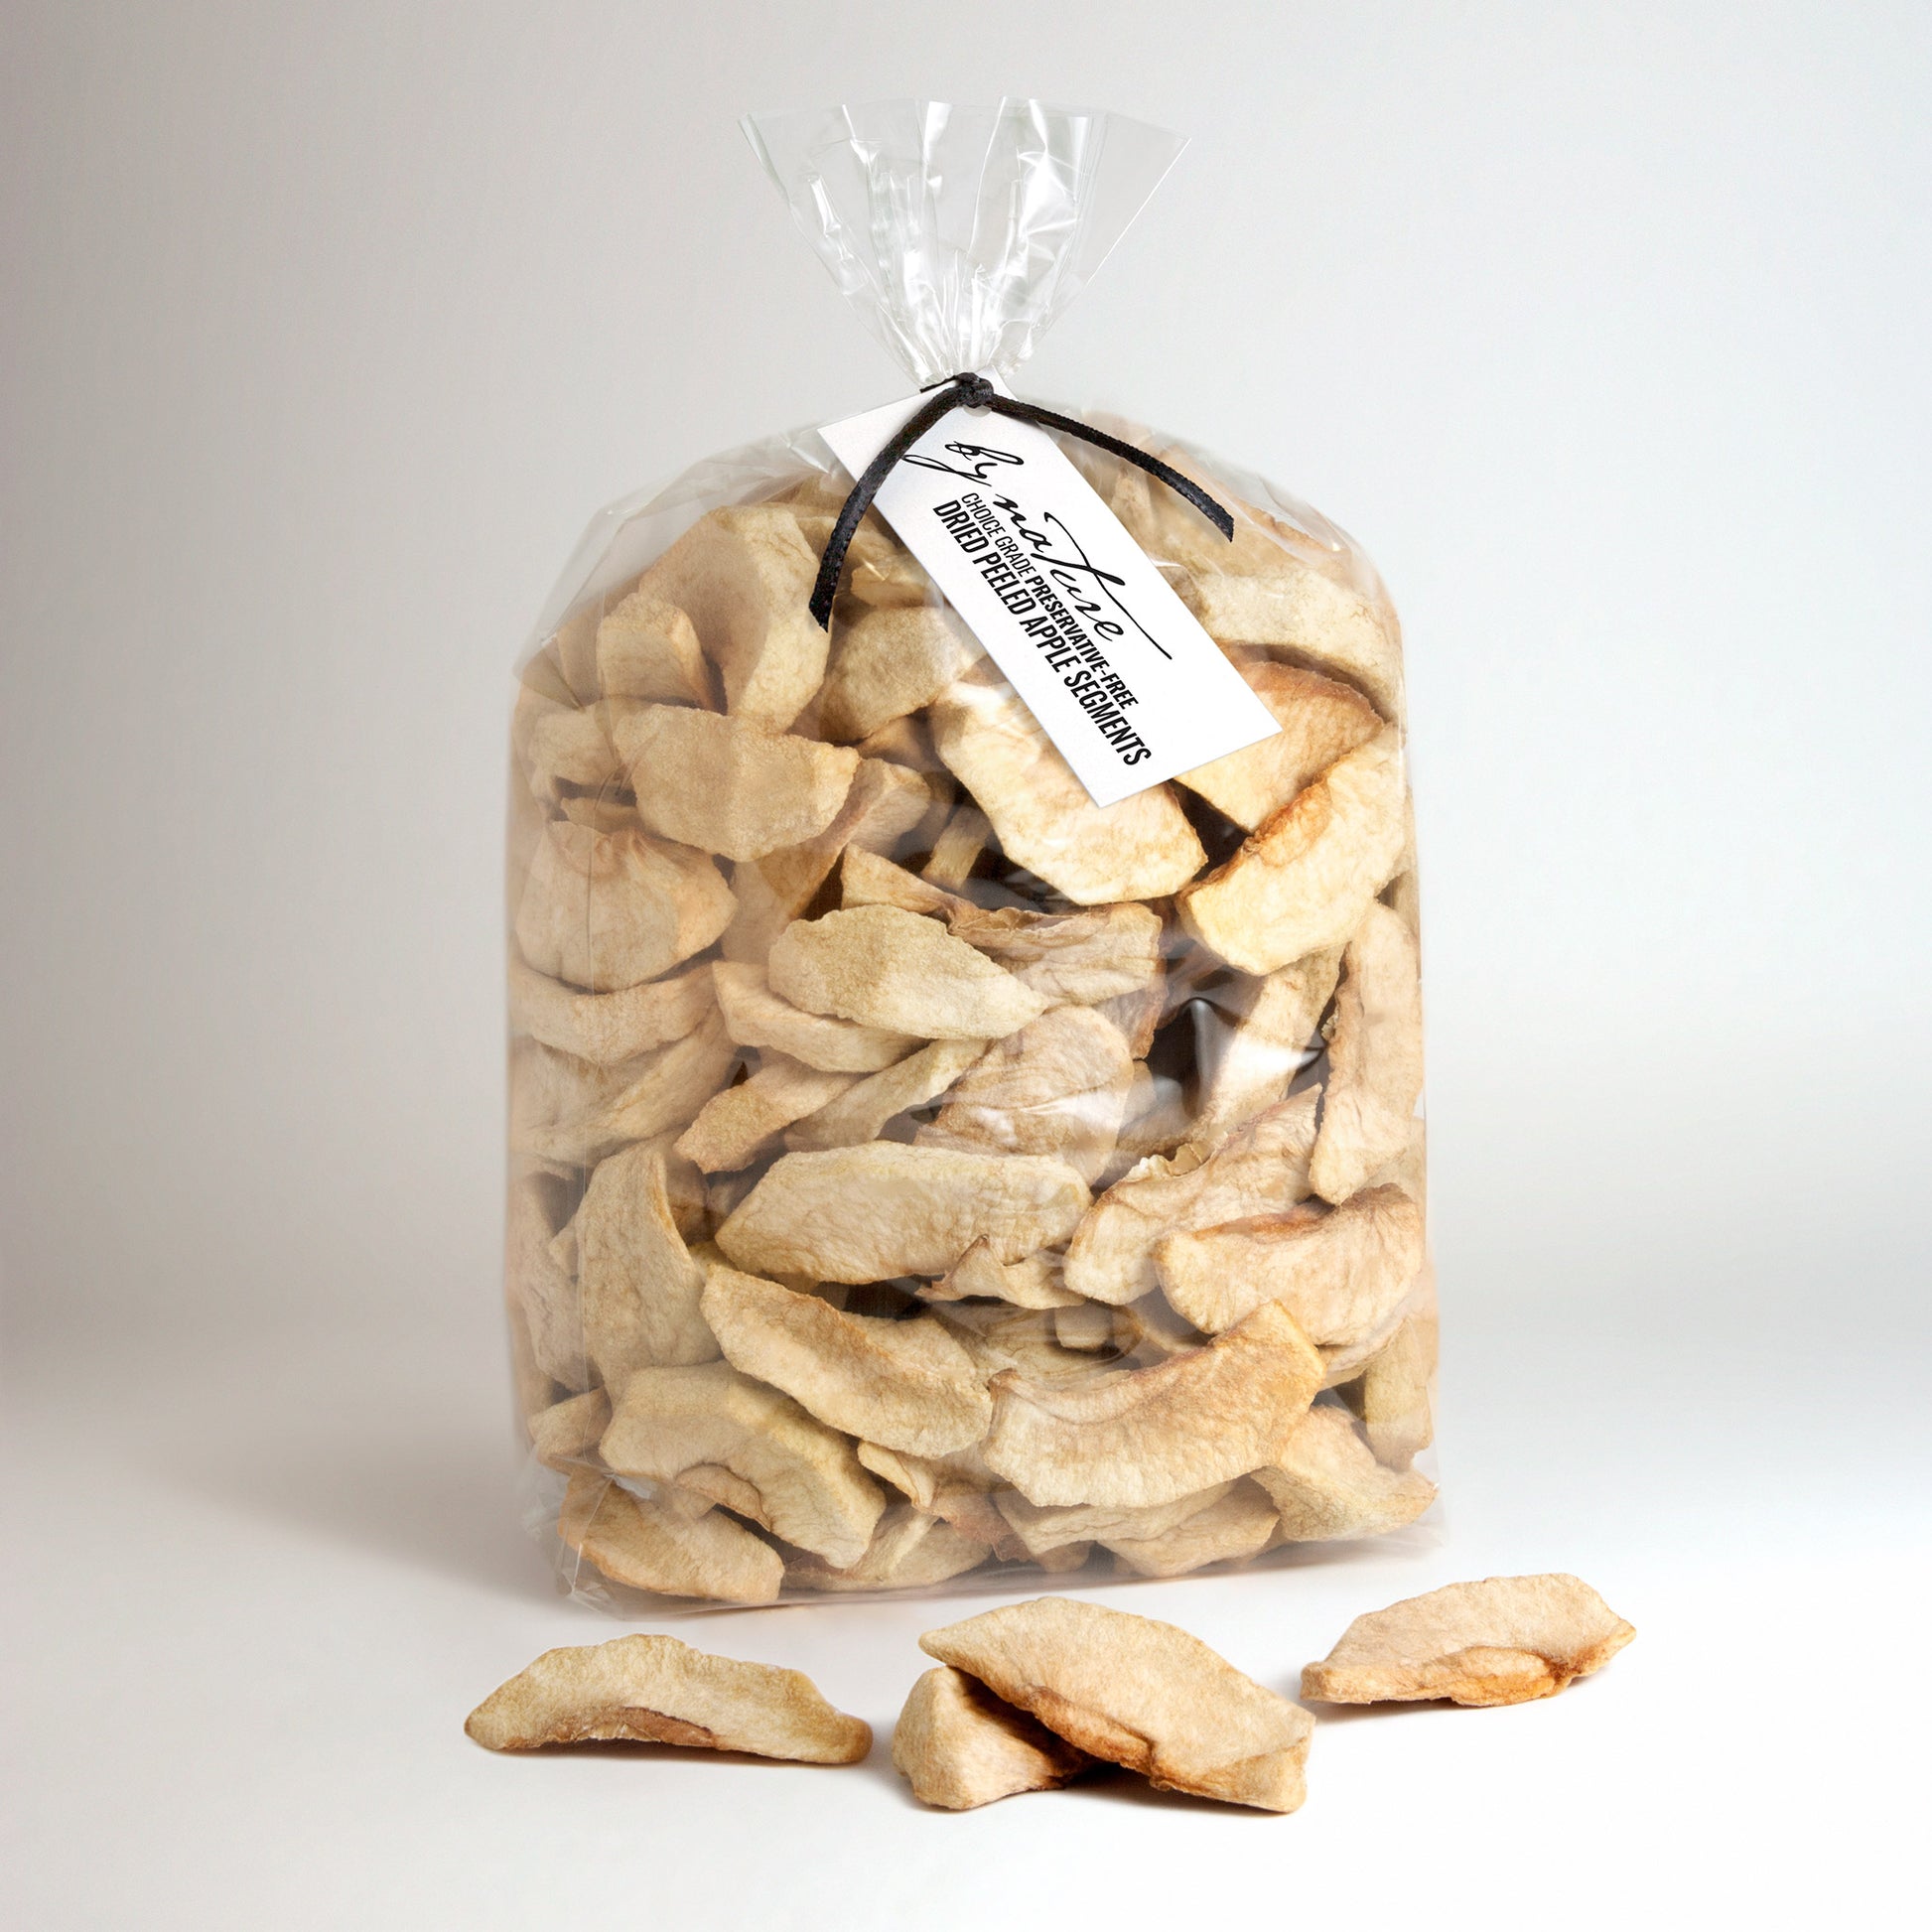 BY NATURE Dried Apple Segments, 1kg - preservative-free.